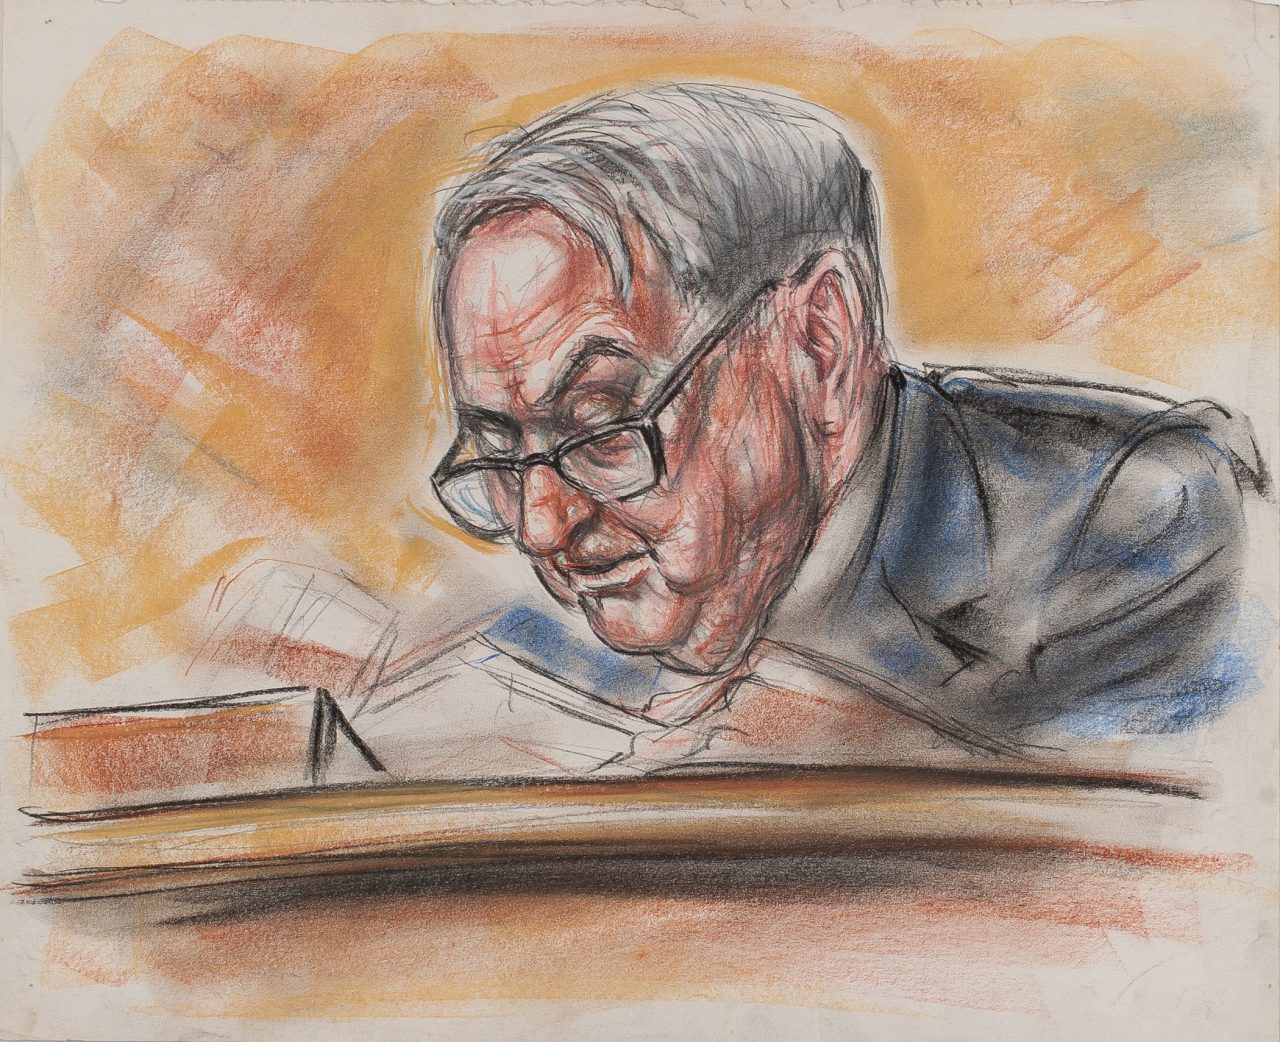 Watergate Courtroom Sketches by Freda L. Reiter Drawing Nixon and The